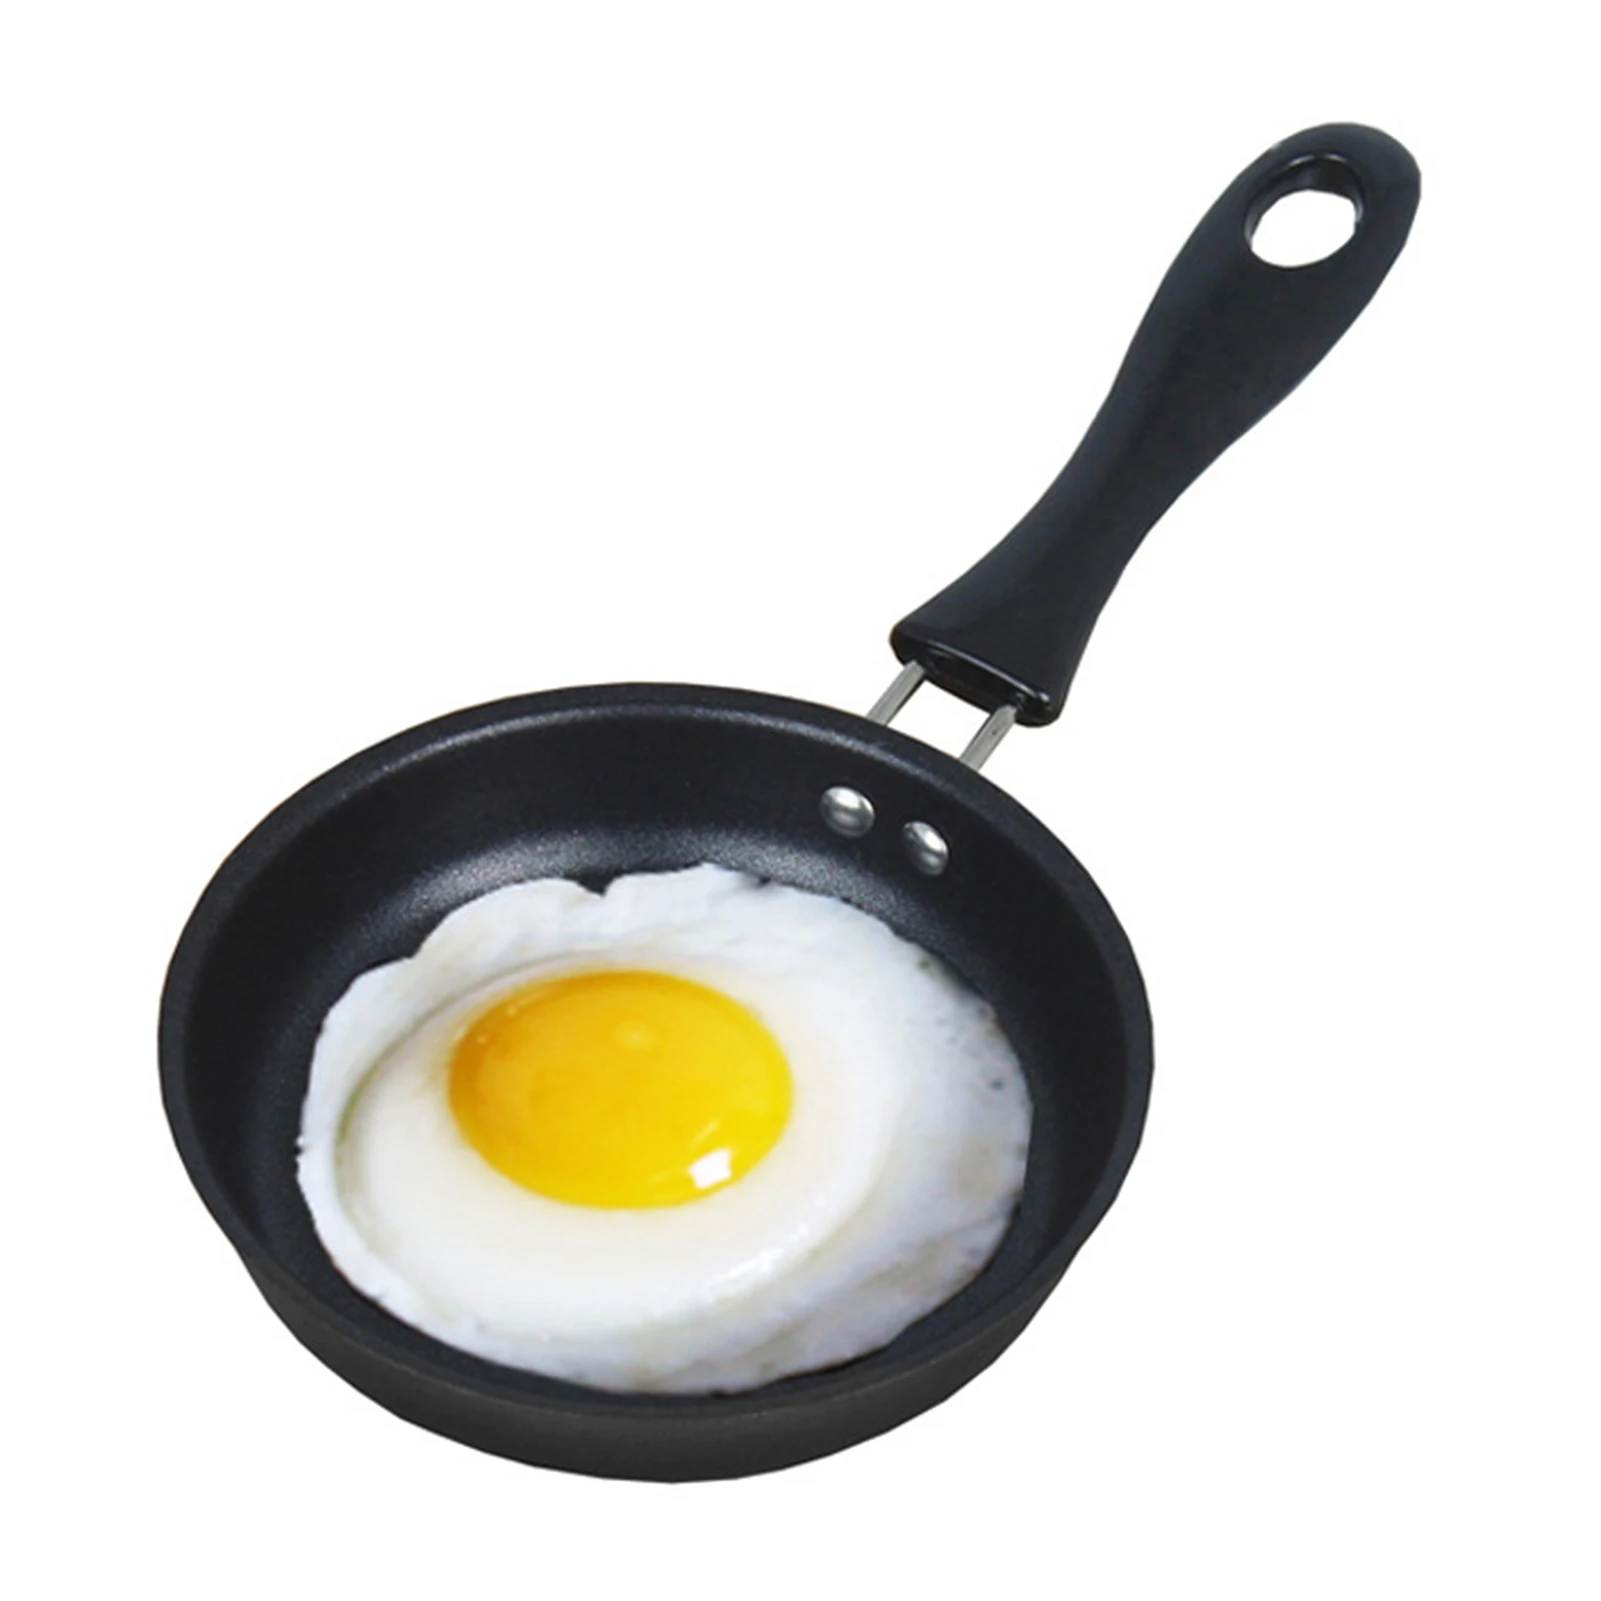 https://ae01.alicdn.com/kf/S46e9ffe8db0d46c1852f747c2dea56dbO/Mini-Household-Frying-Pan-Heat-Resistant-Egg-Frying-Pan-for-Camping-Outdoor-Cooking.jpg